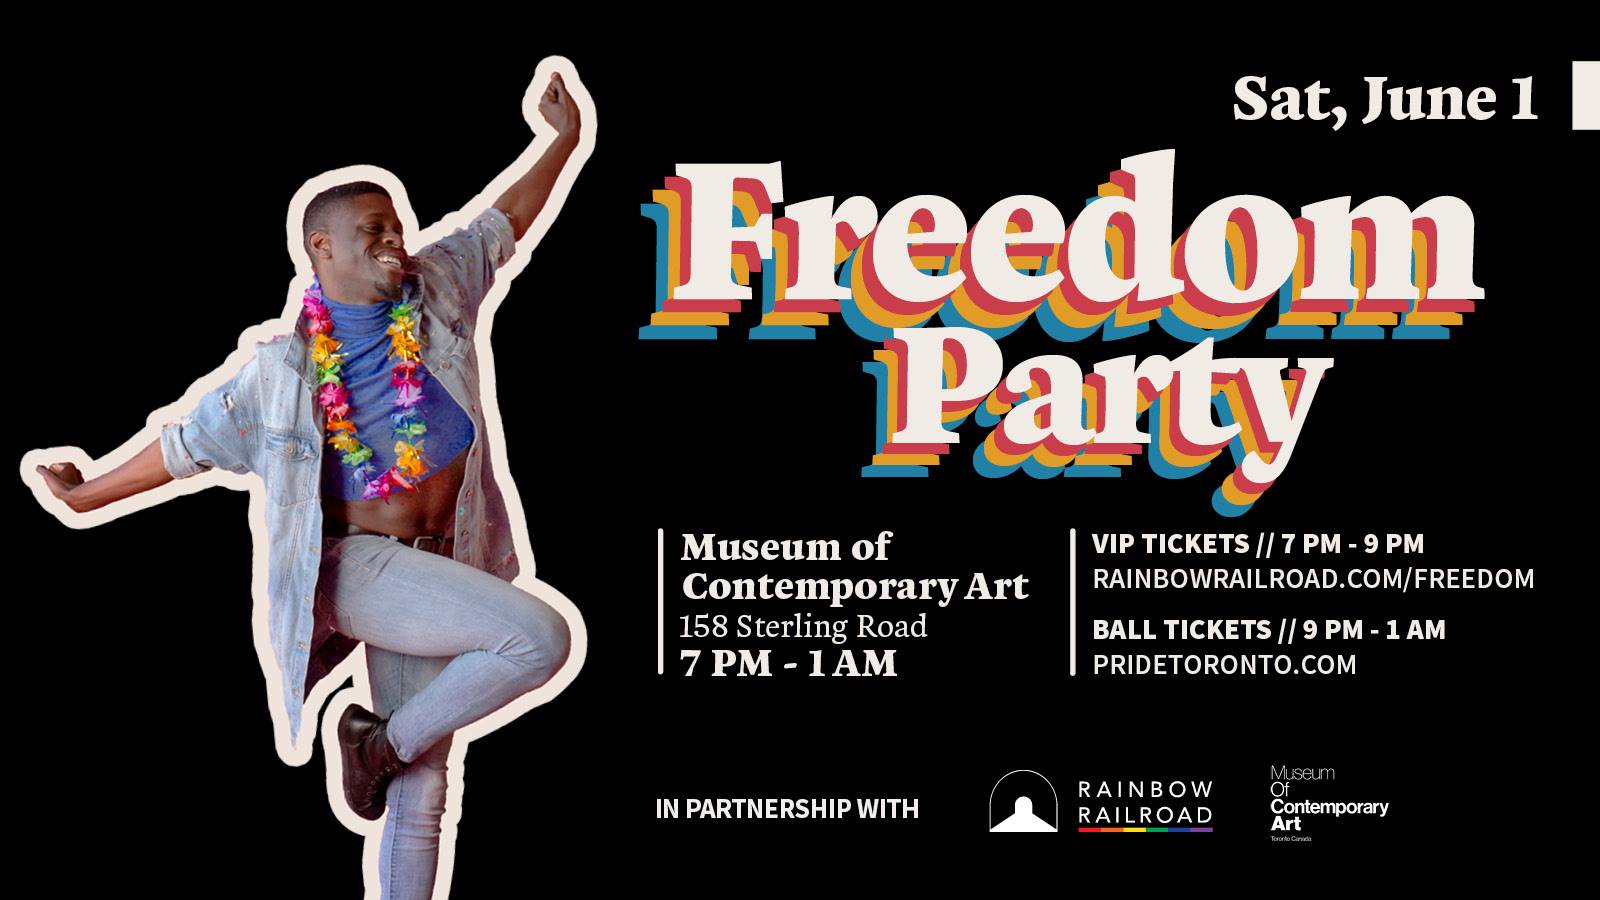 QueerEvents.ca - Toronto event listing - Freedom Party Launch party